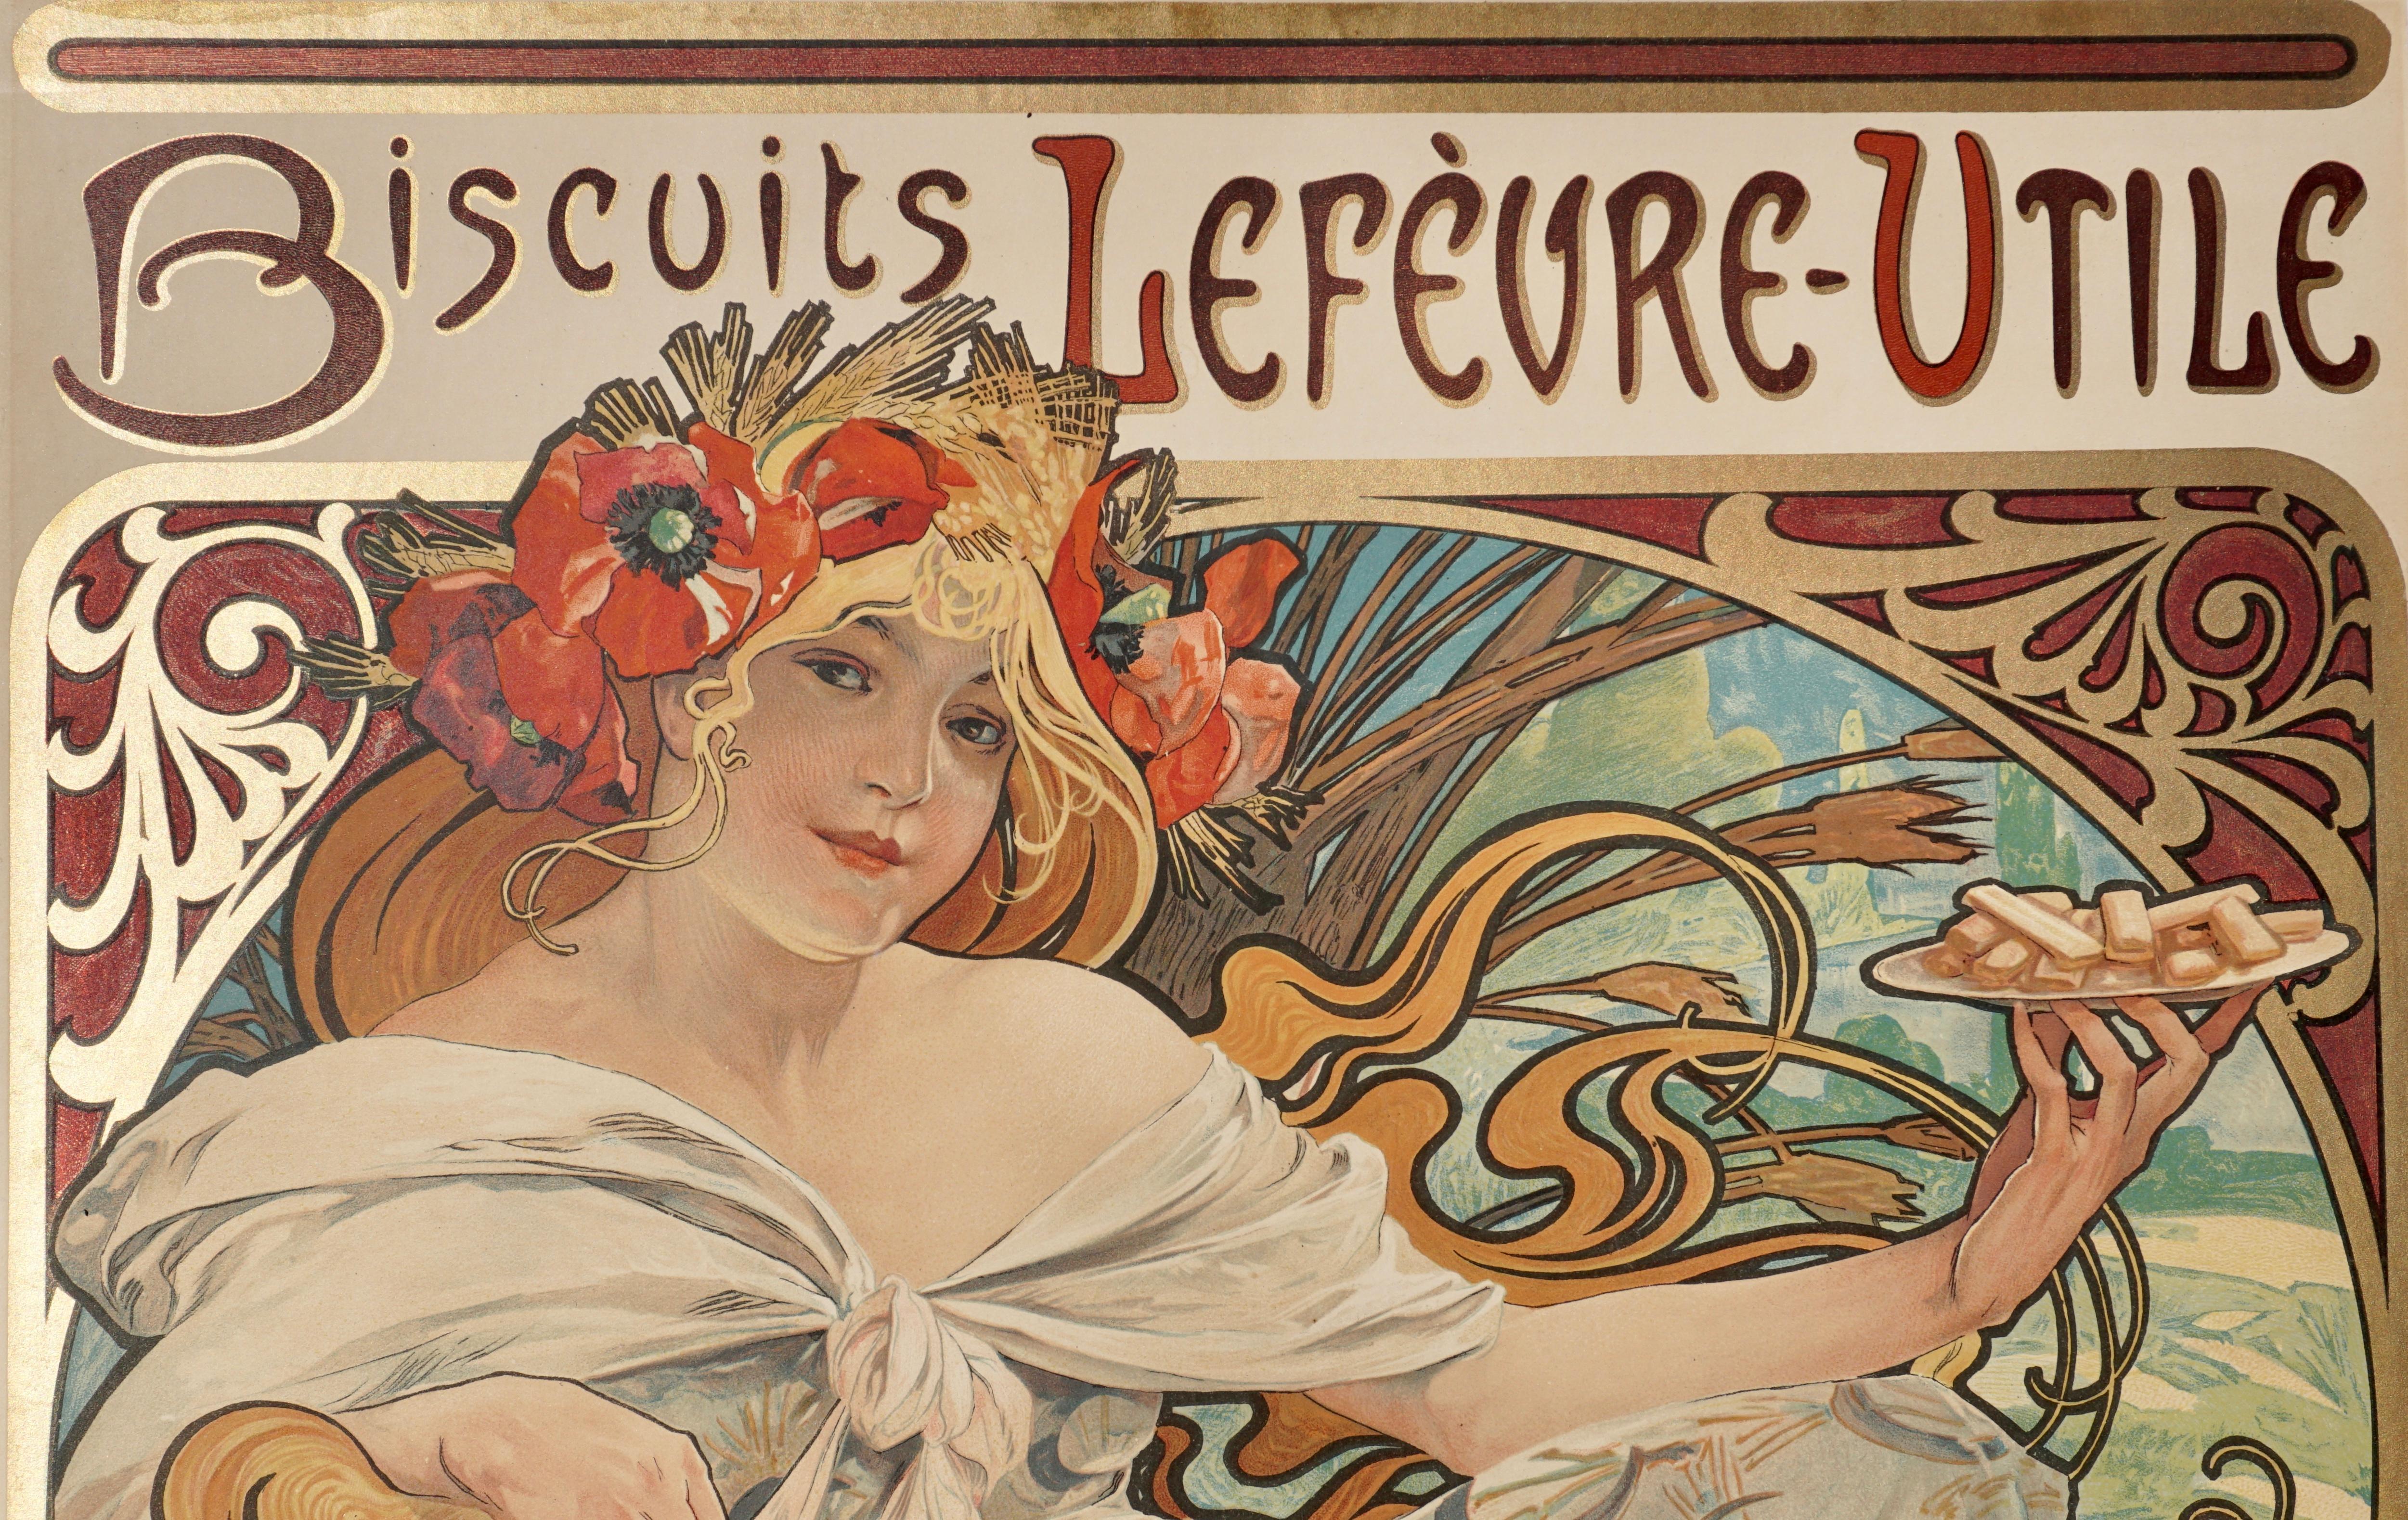 Hand-Crafted Alphonse Mucha Biscuits Lefeure Utile Poster, 1897